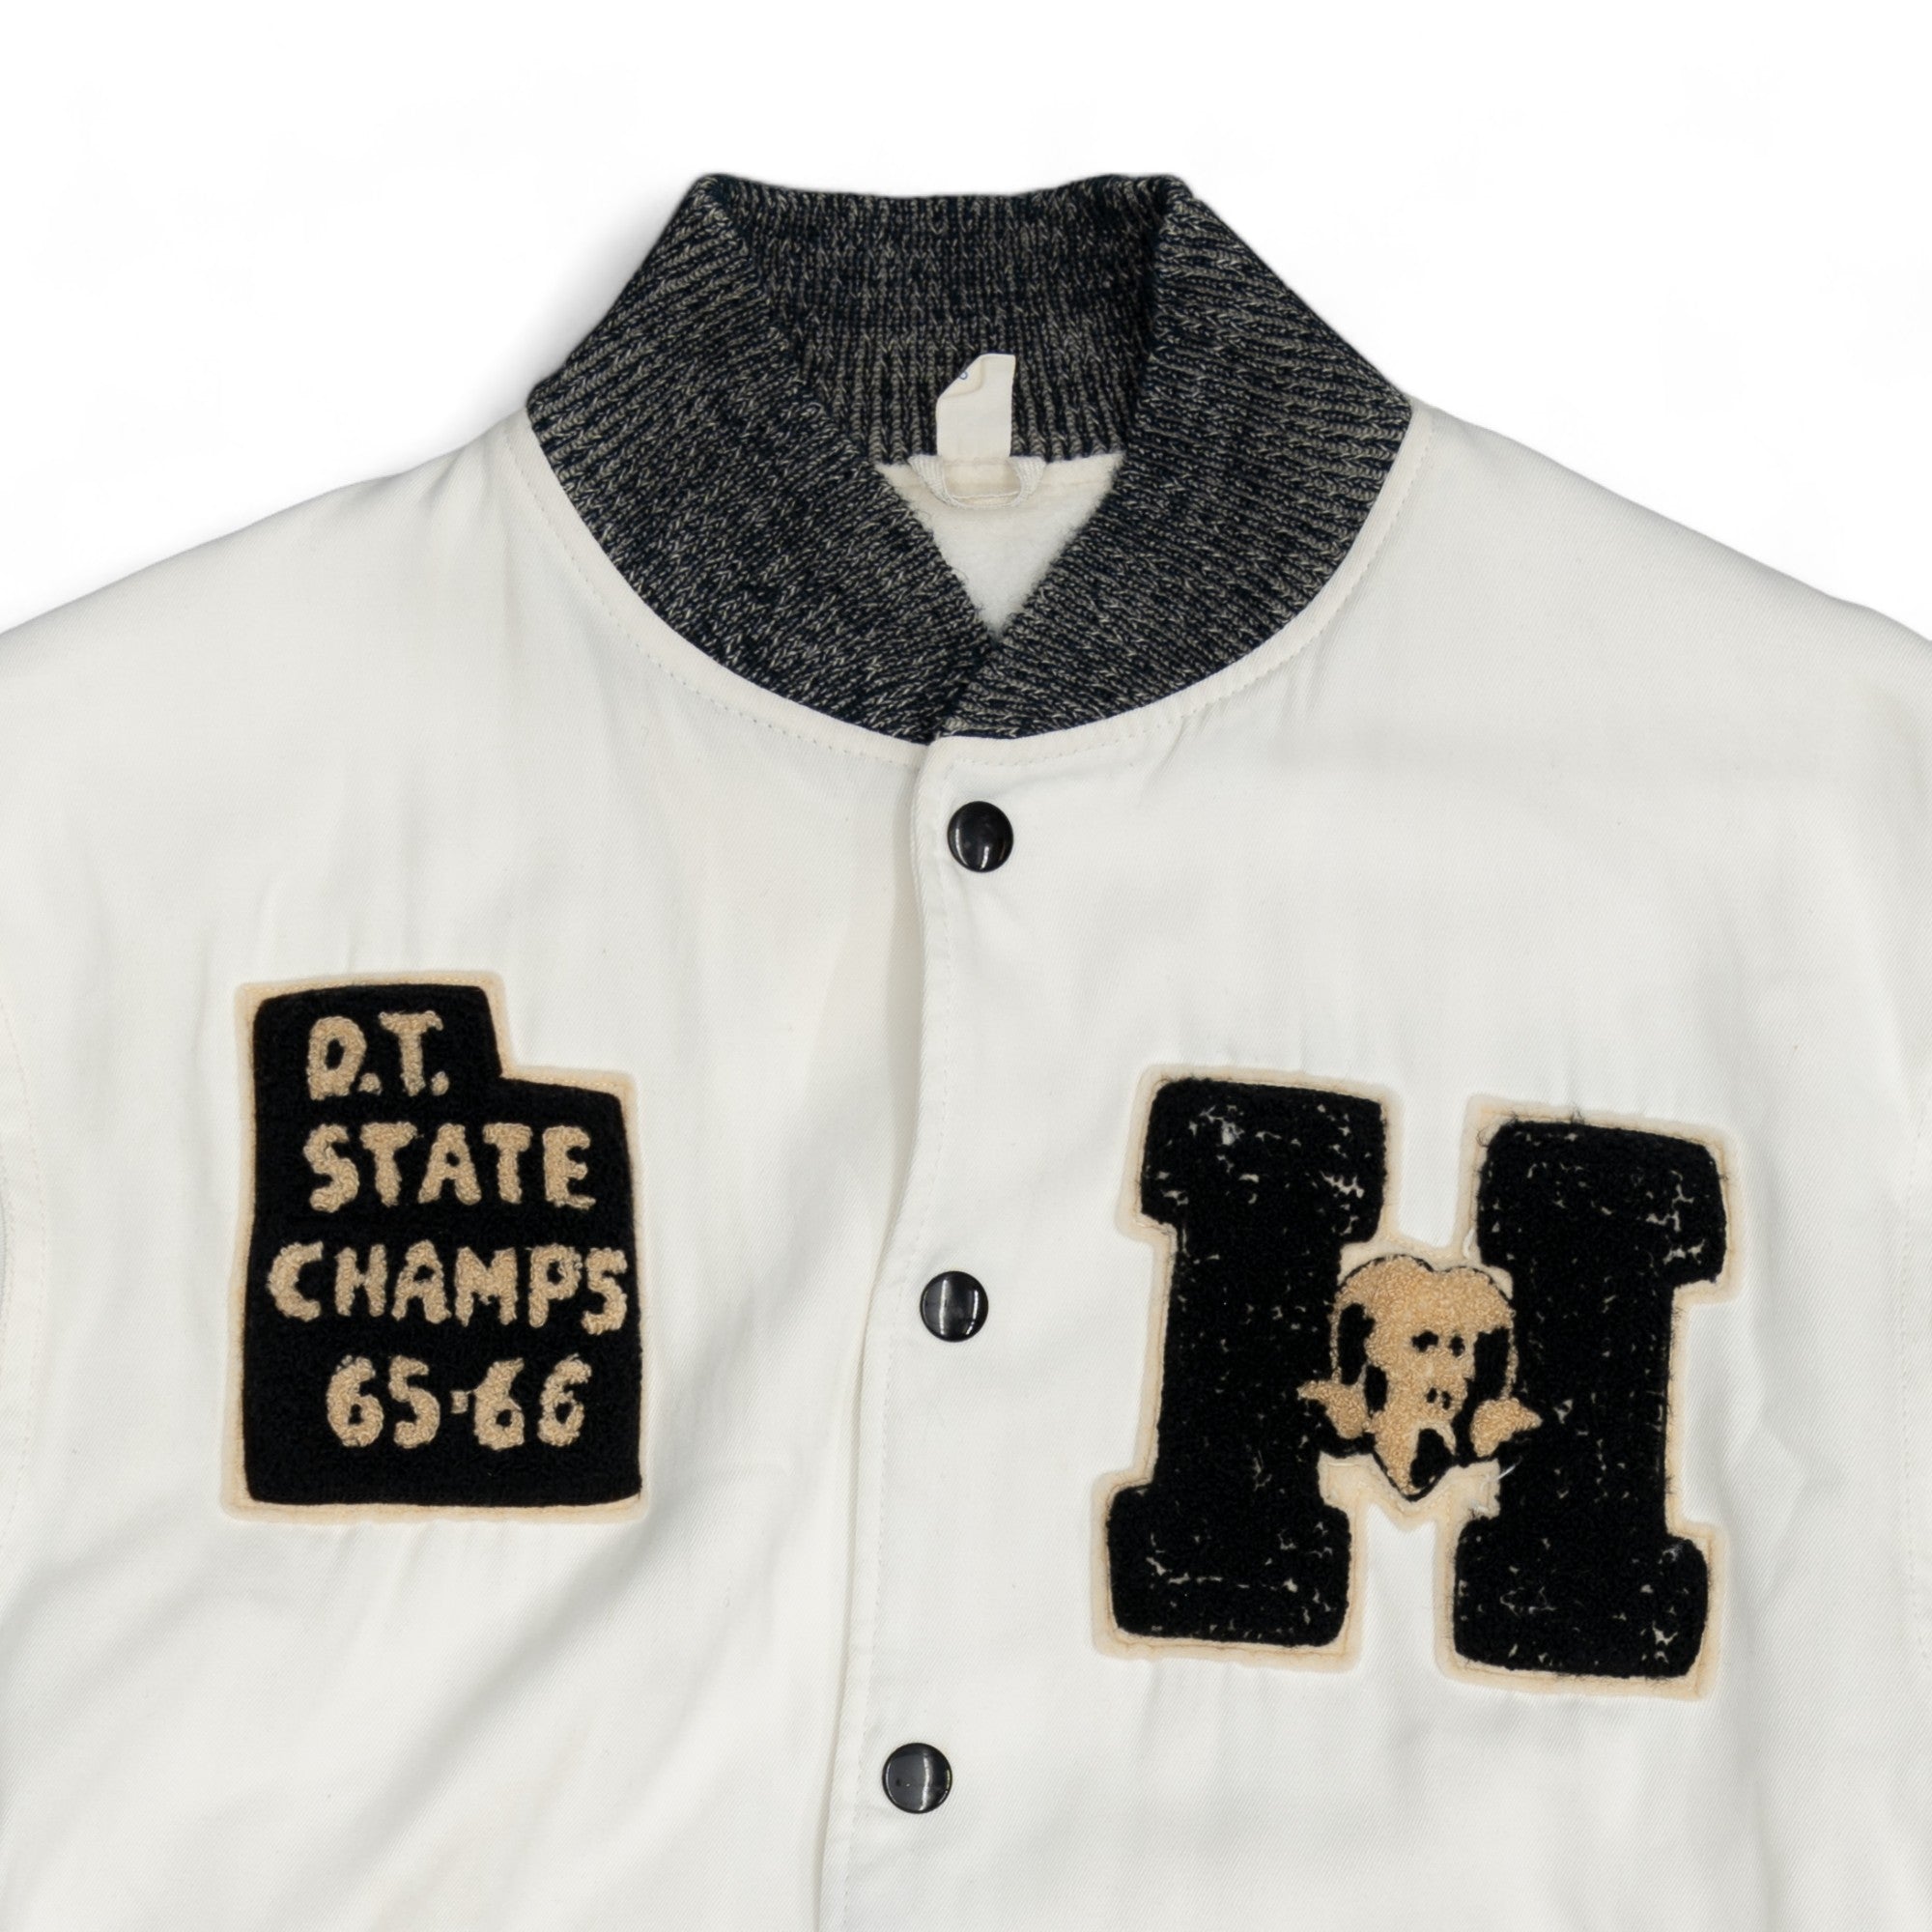 D.T. 'STATE CHAMPS' VARSITY JACKET - 1960'S